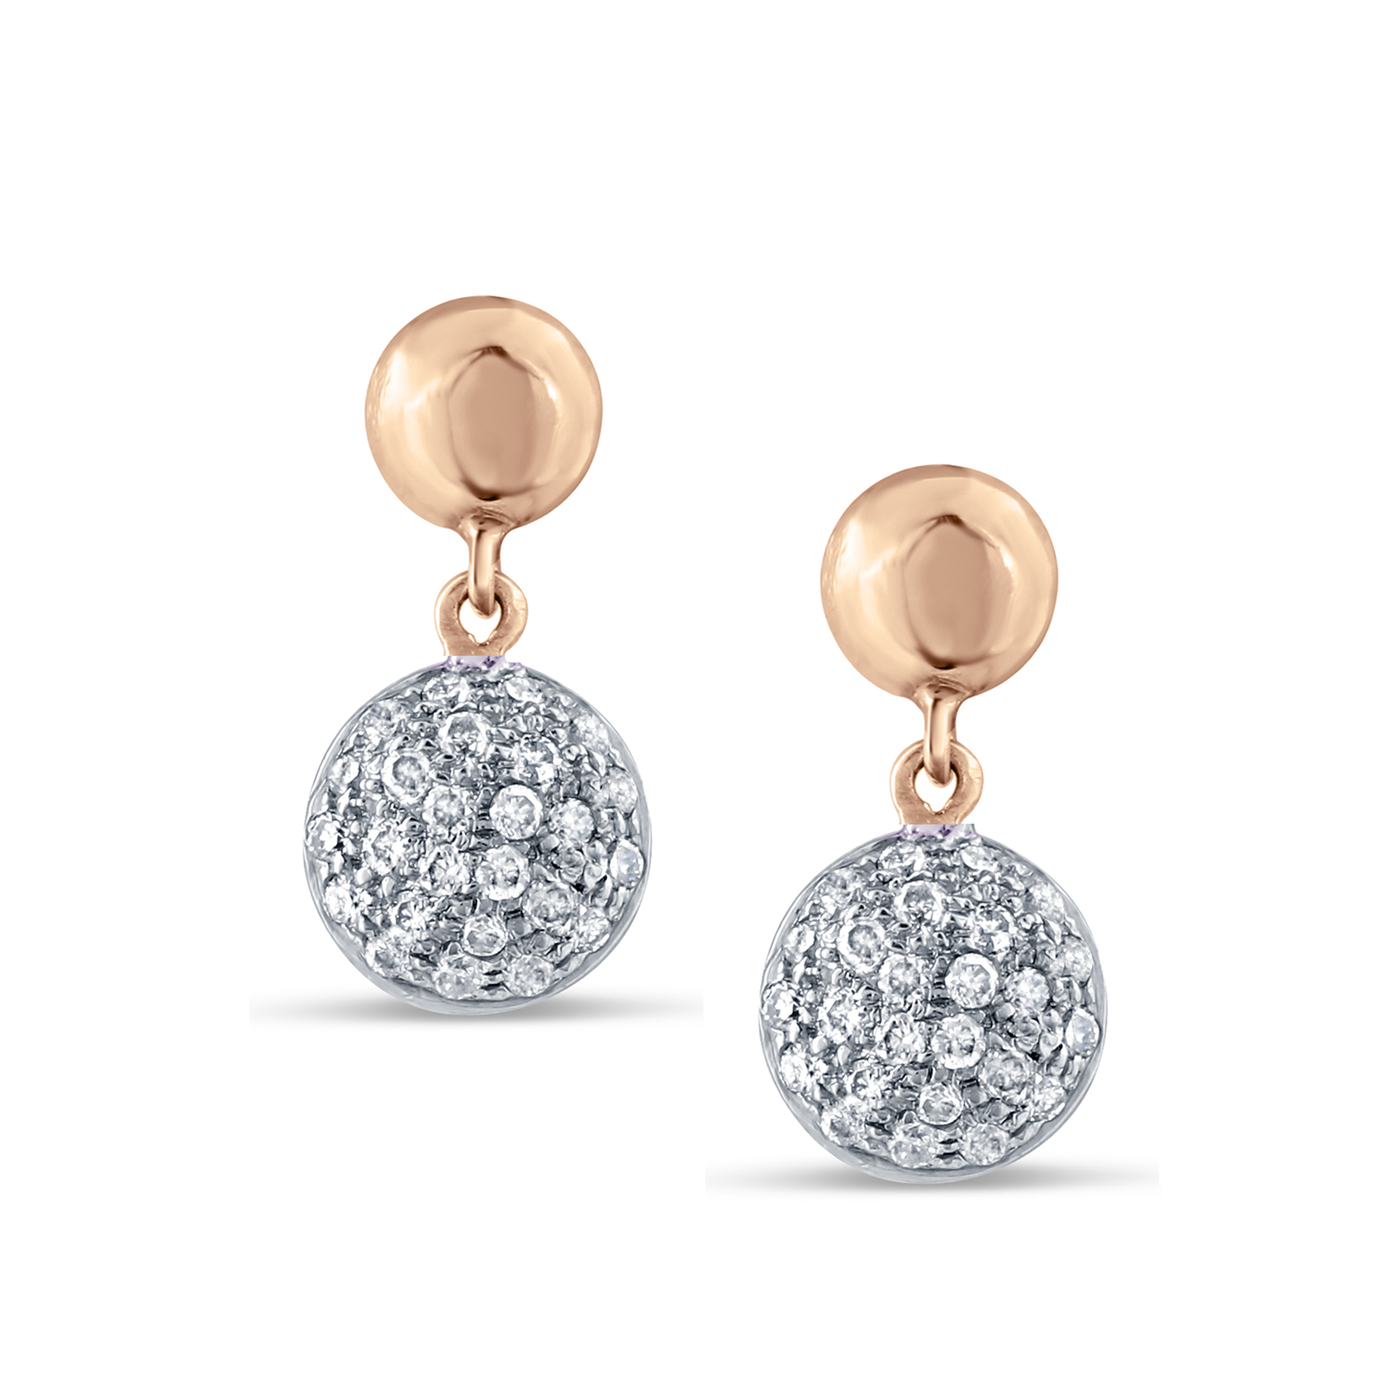 Lente 2 Tier Earring With Pave Diamond In 18K Rose Gold